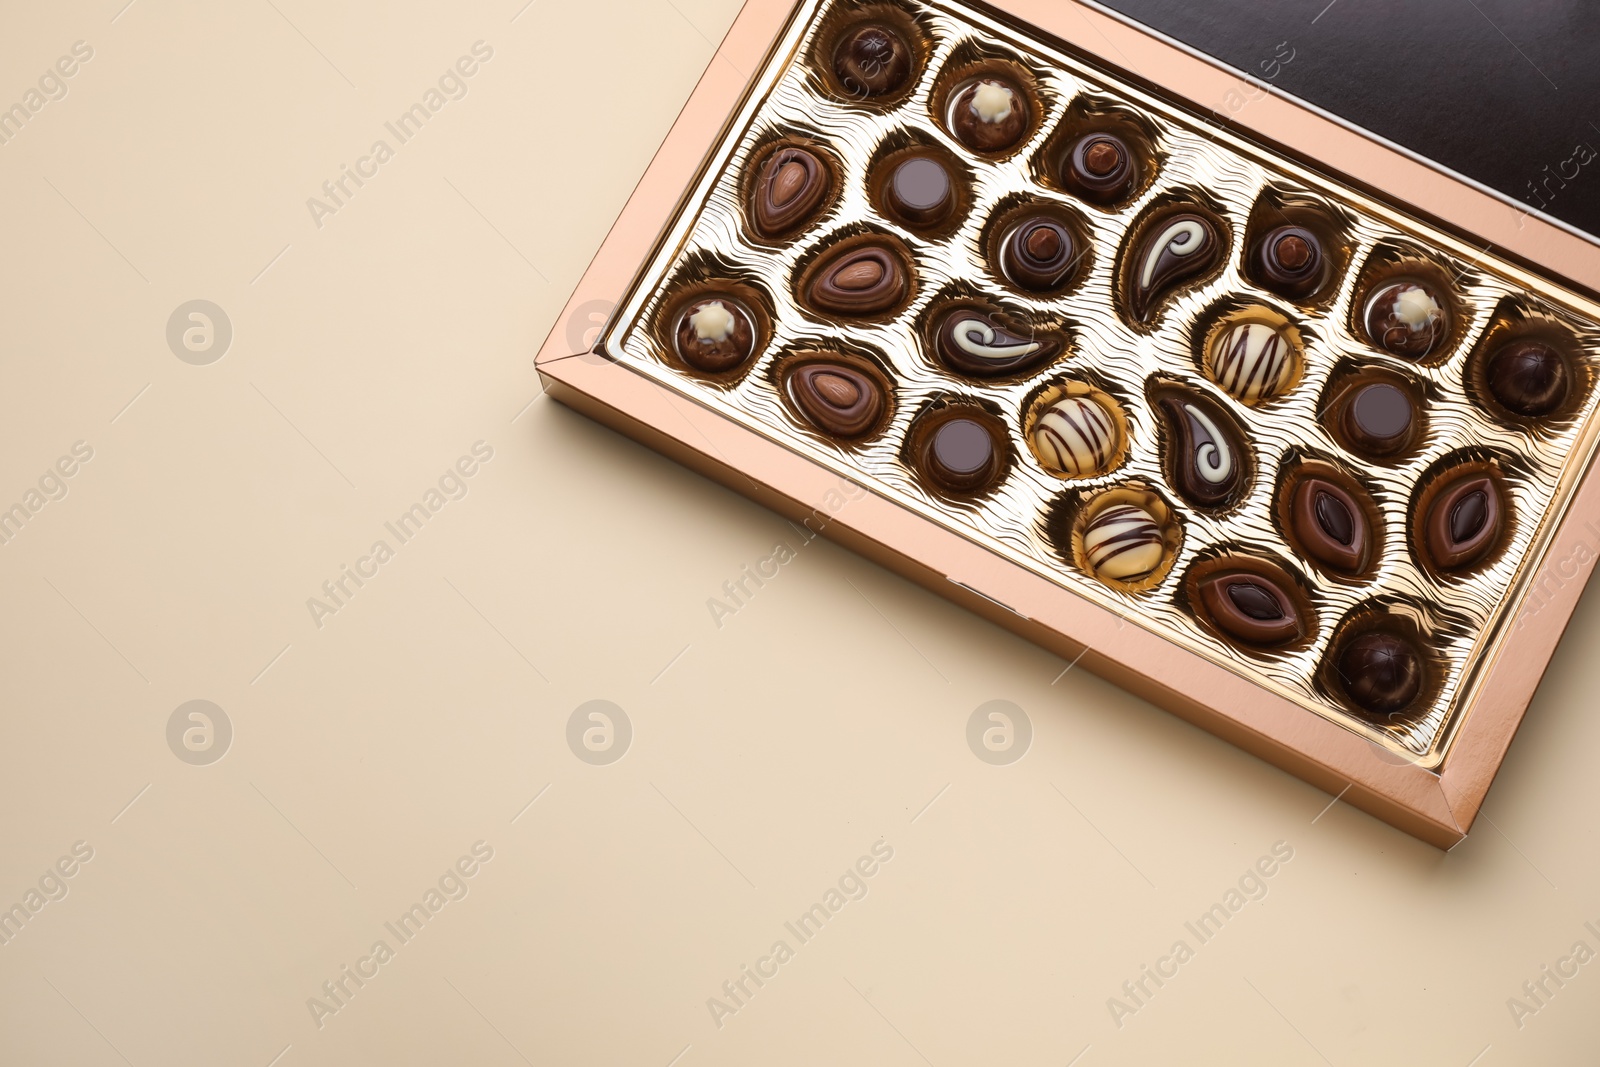 Photo of Box of delicious chocolate candies on beige background, top view. Space for text